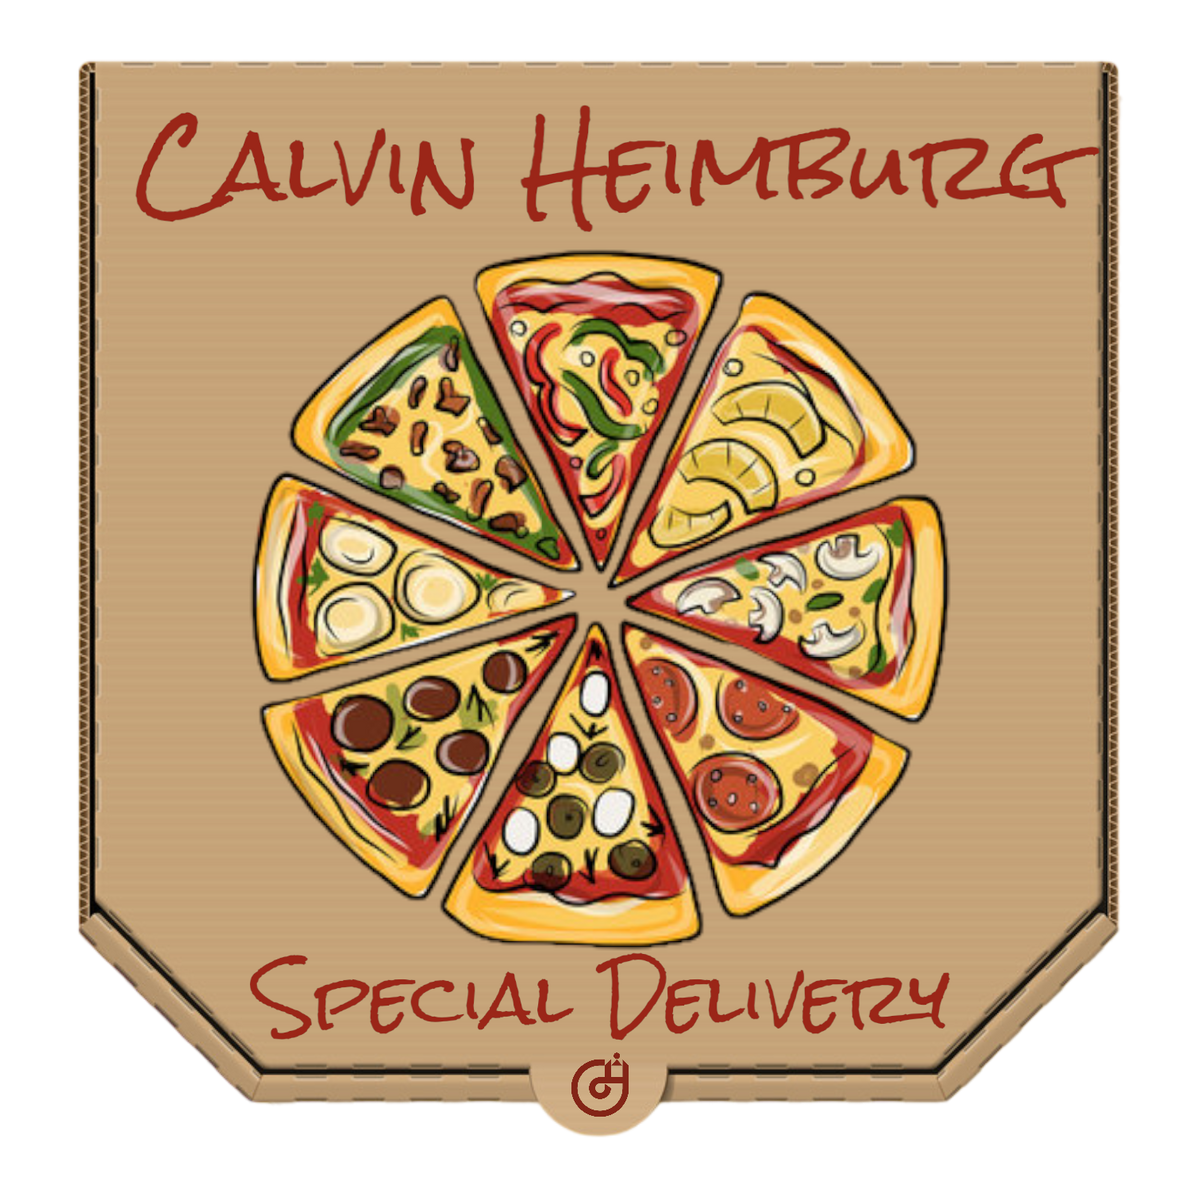 Calvin Heimburg Monthly Special Delivery Subscription Box